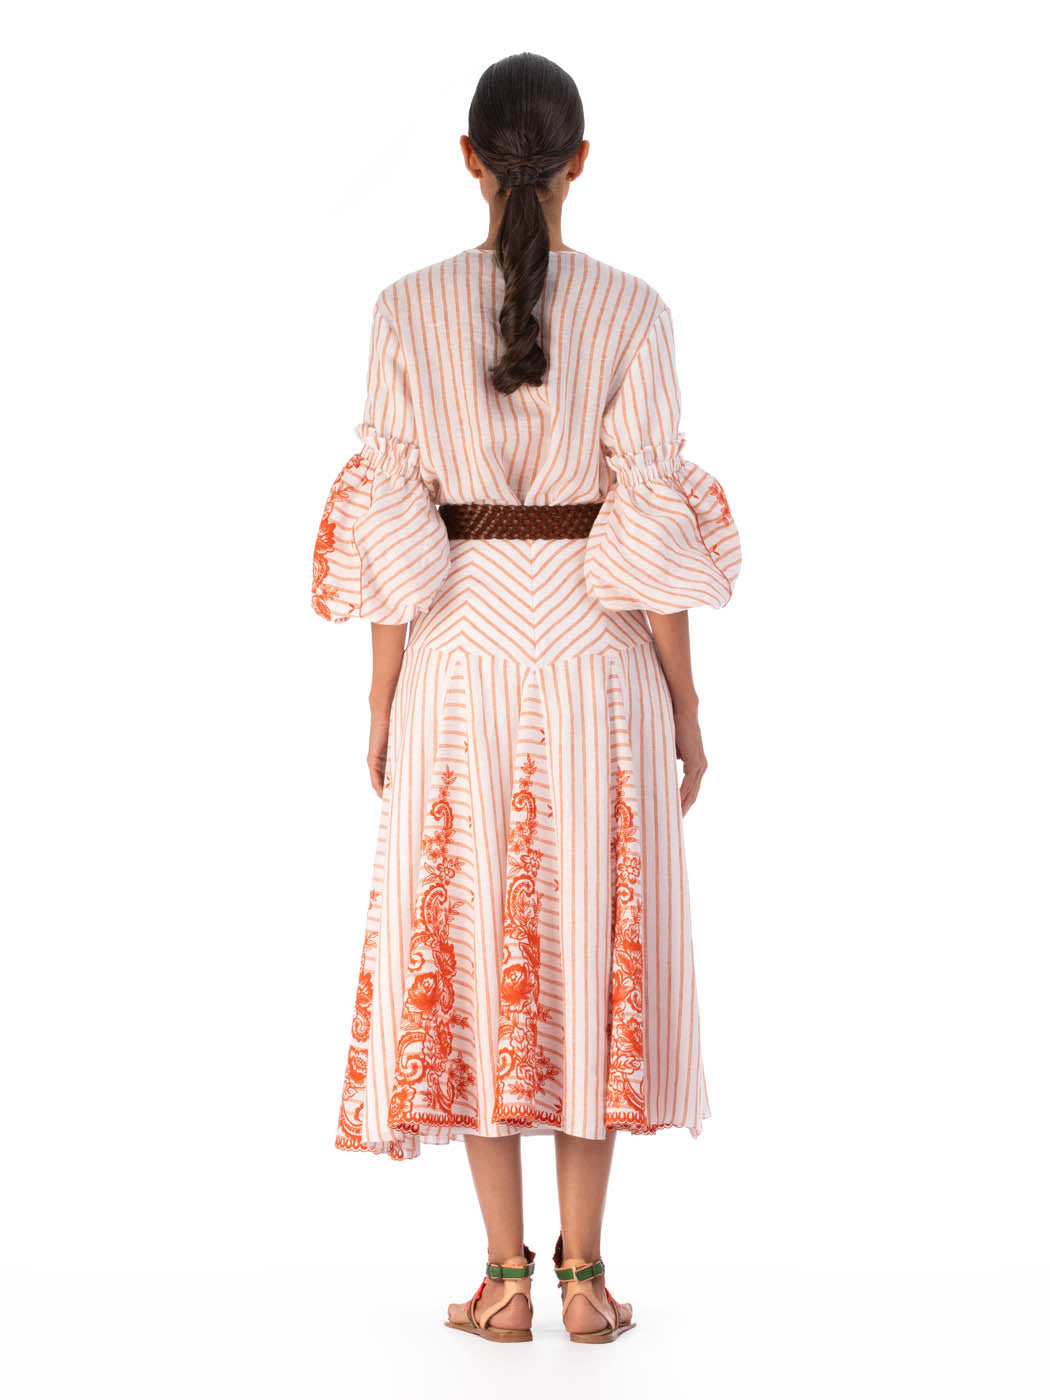 High waisted Fairus Skirt Coral Paisleys Stripes with intricate orange embroidery, isolated on a white background.